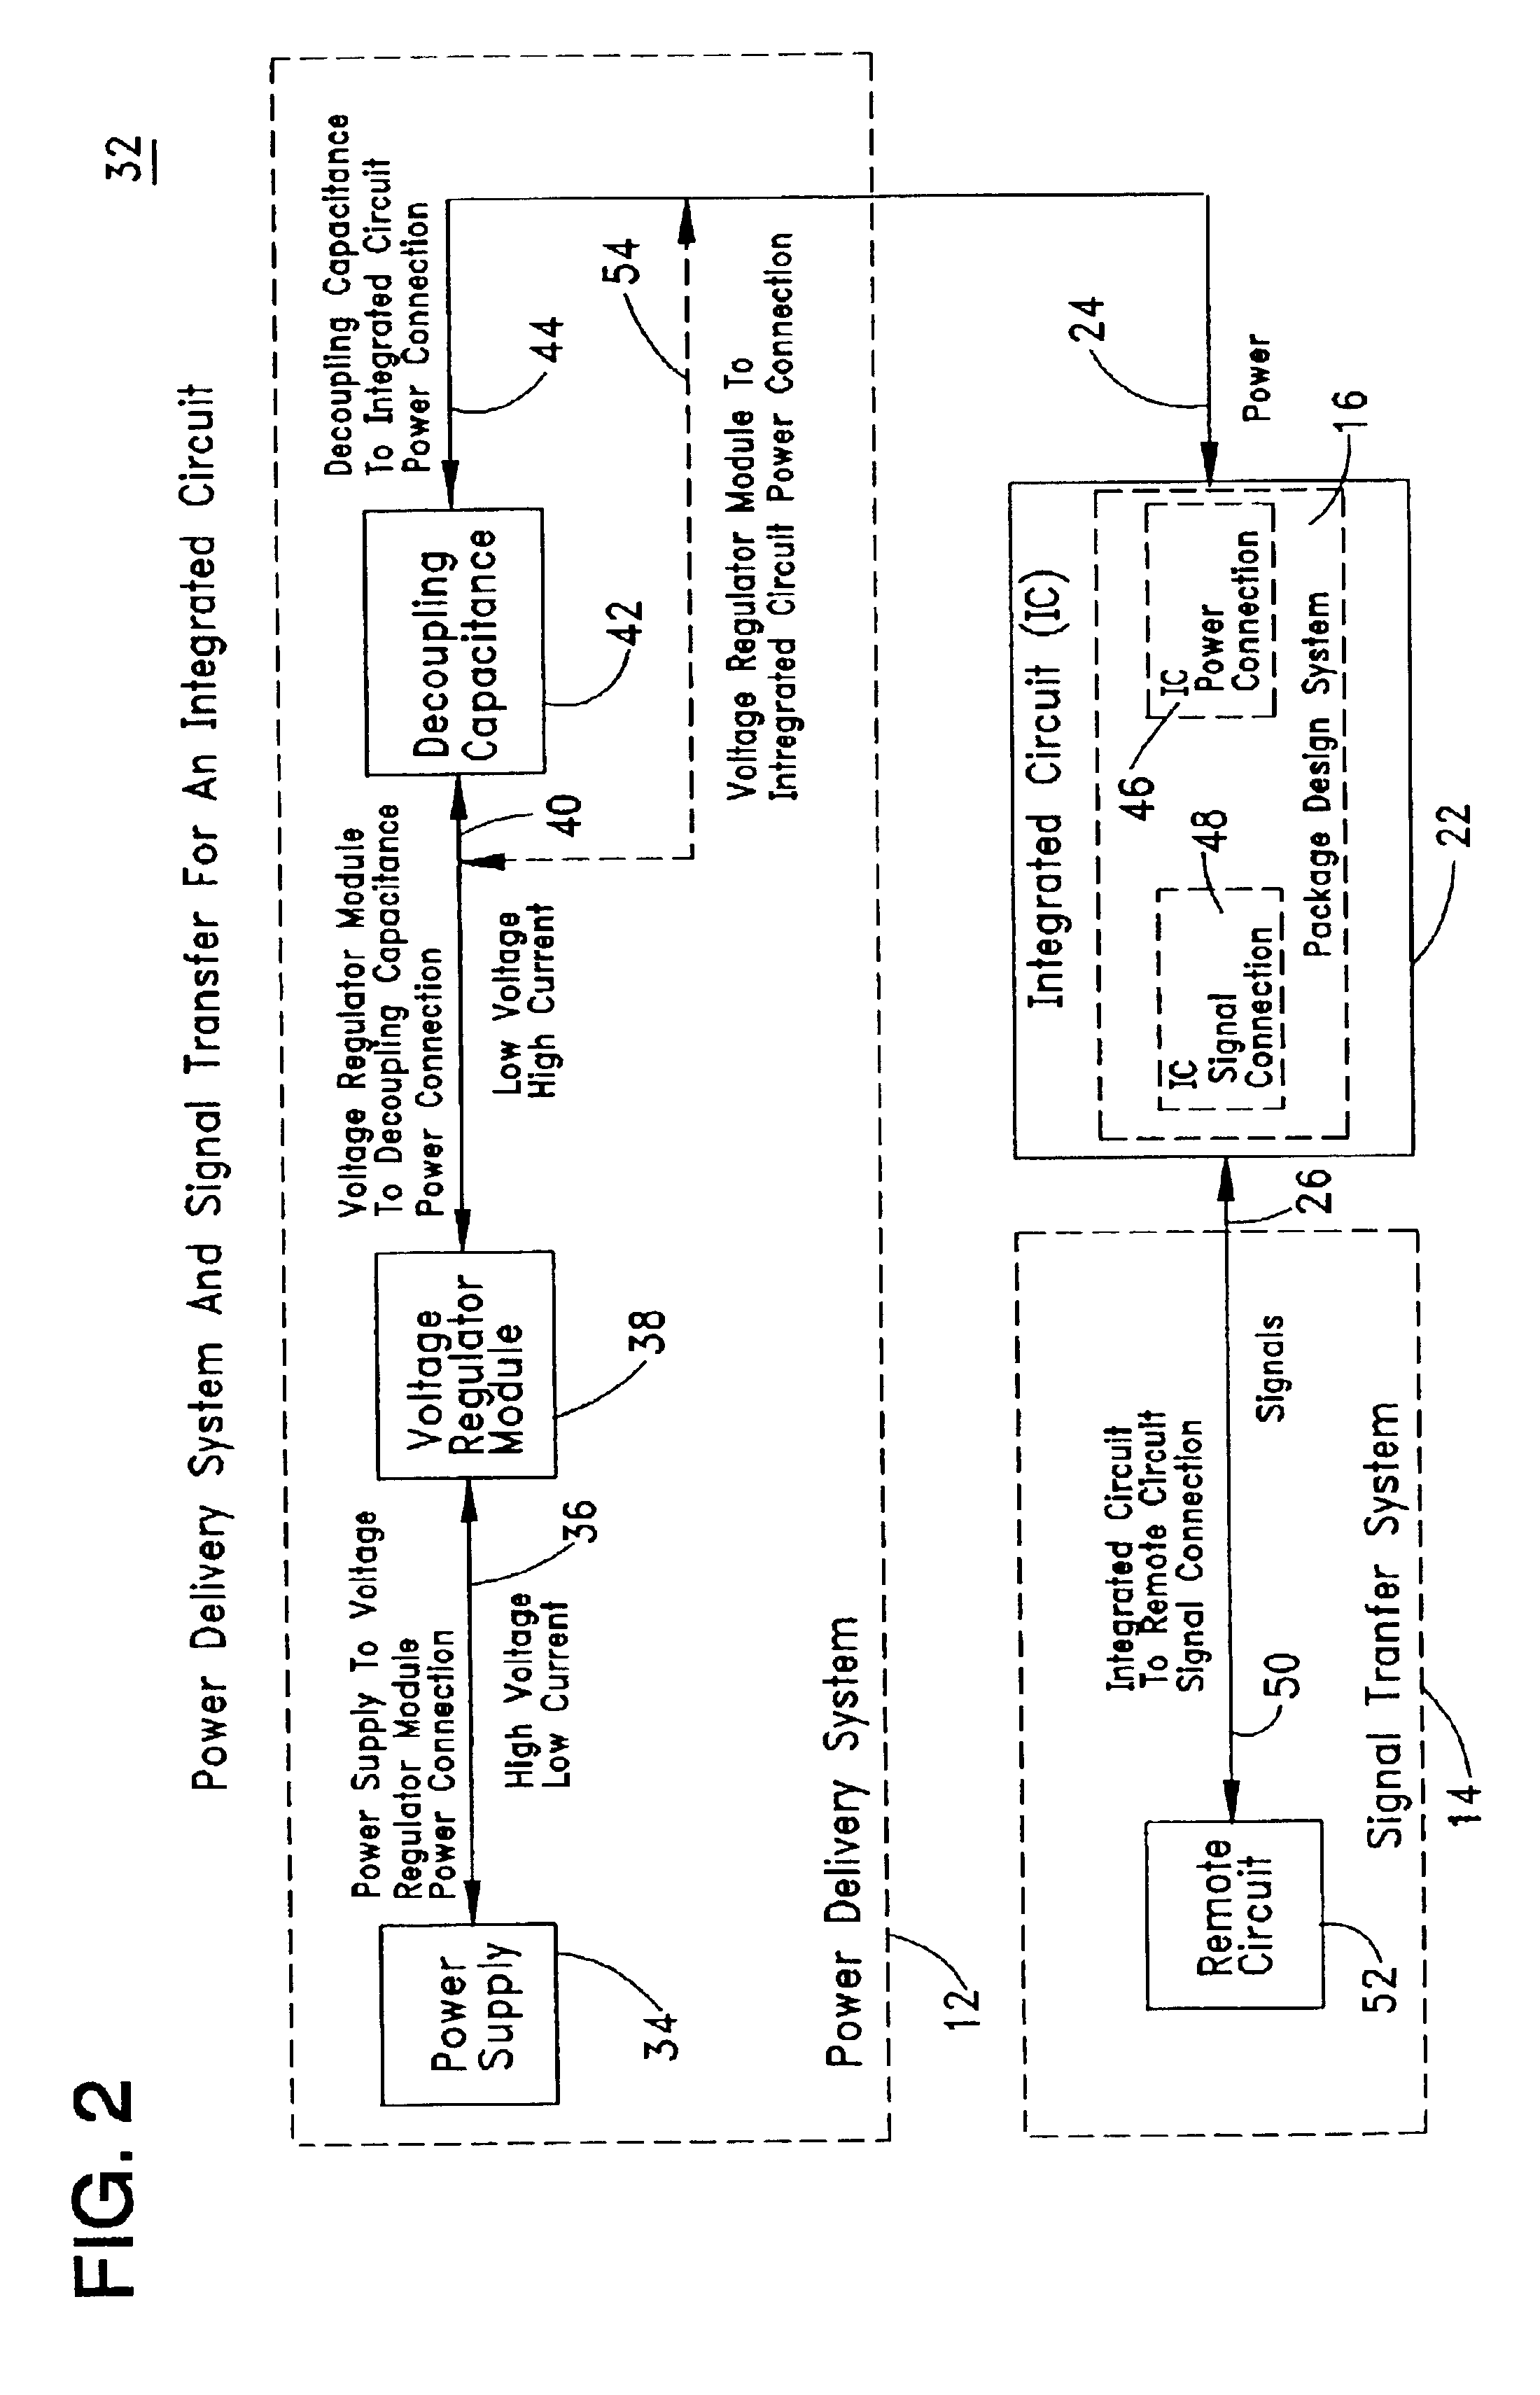 Thermal management of power delivery systems for integrated circuits